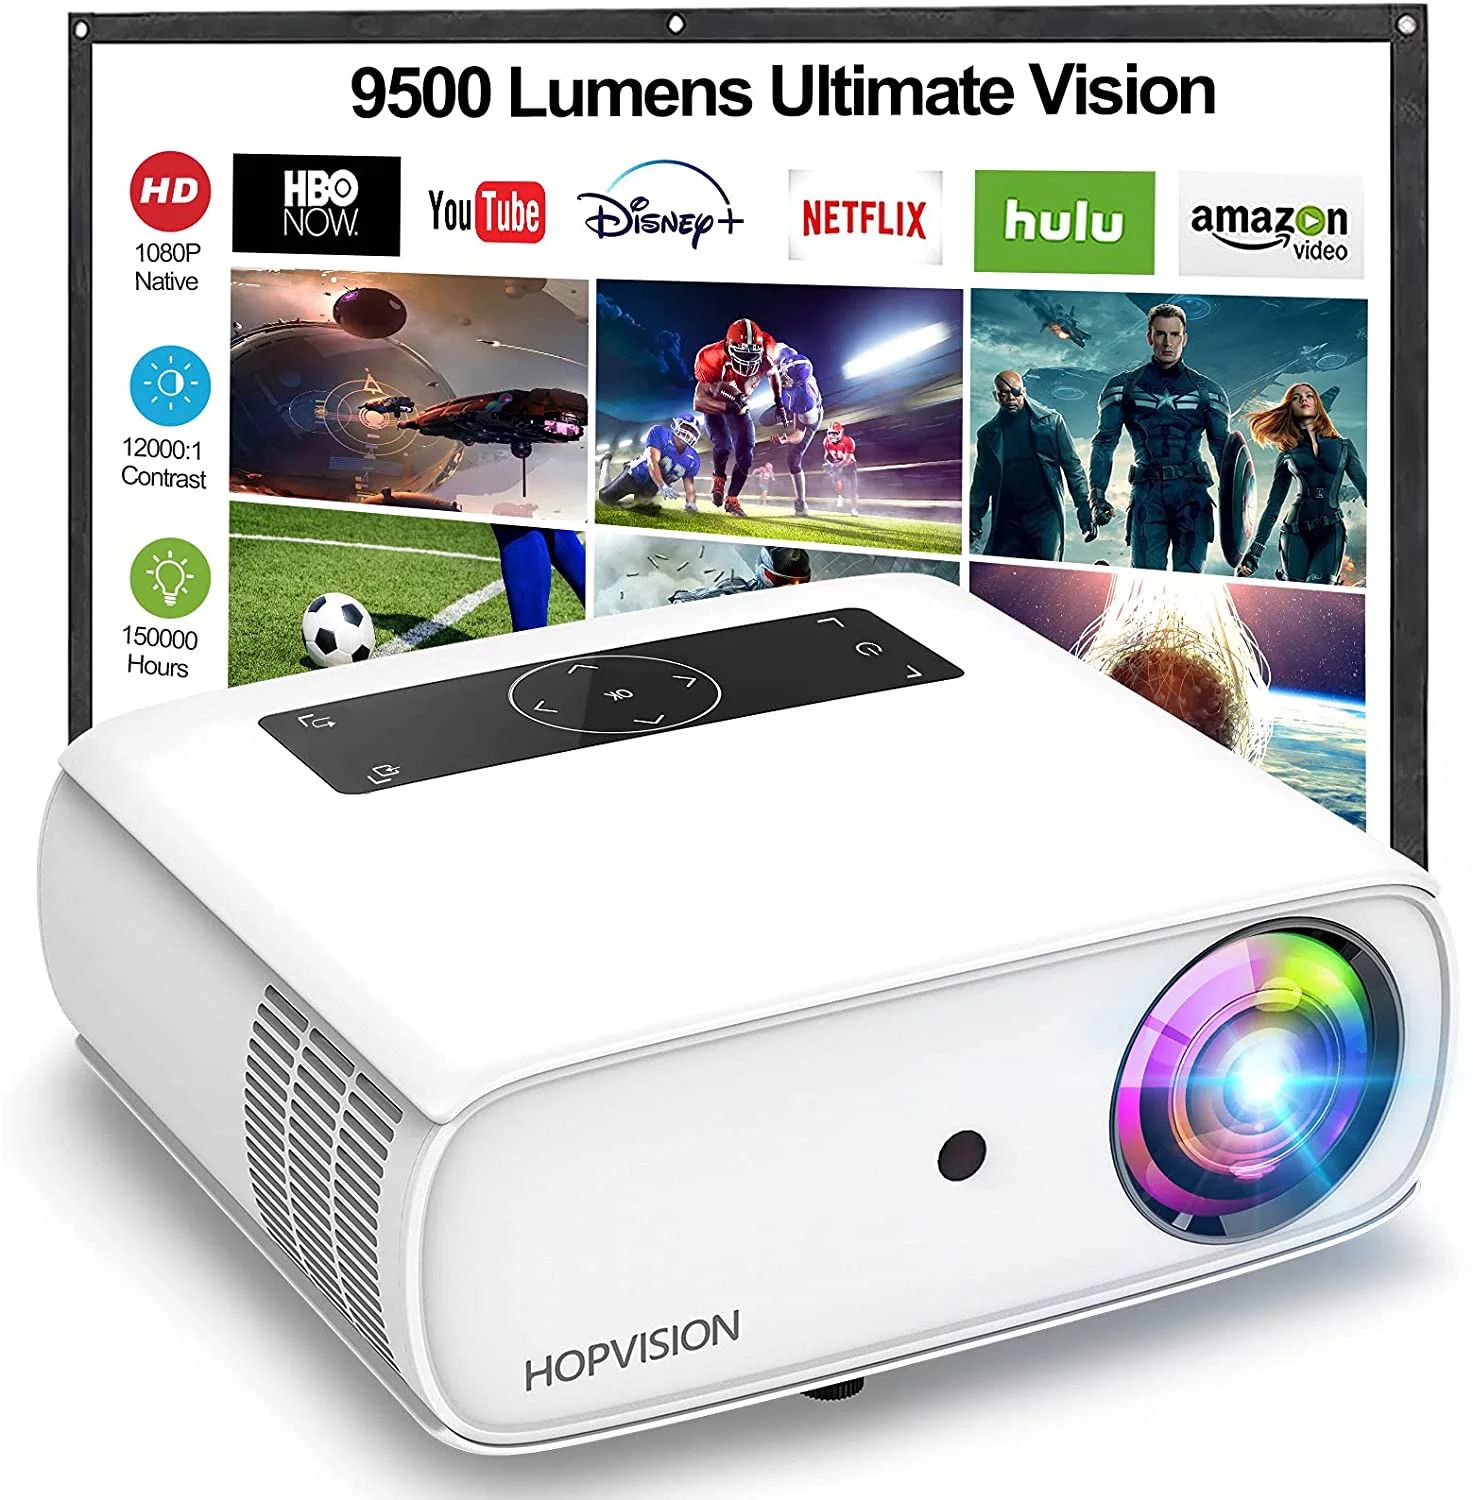 HOPVISION Native 1080P Projector Full HD, 9500Lux Movie Projector with 150000 Hours LED Lamp Life... | Walmart (US)